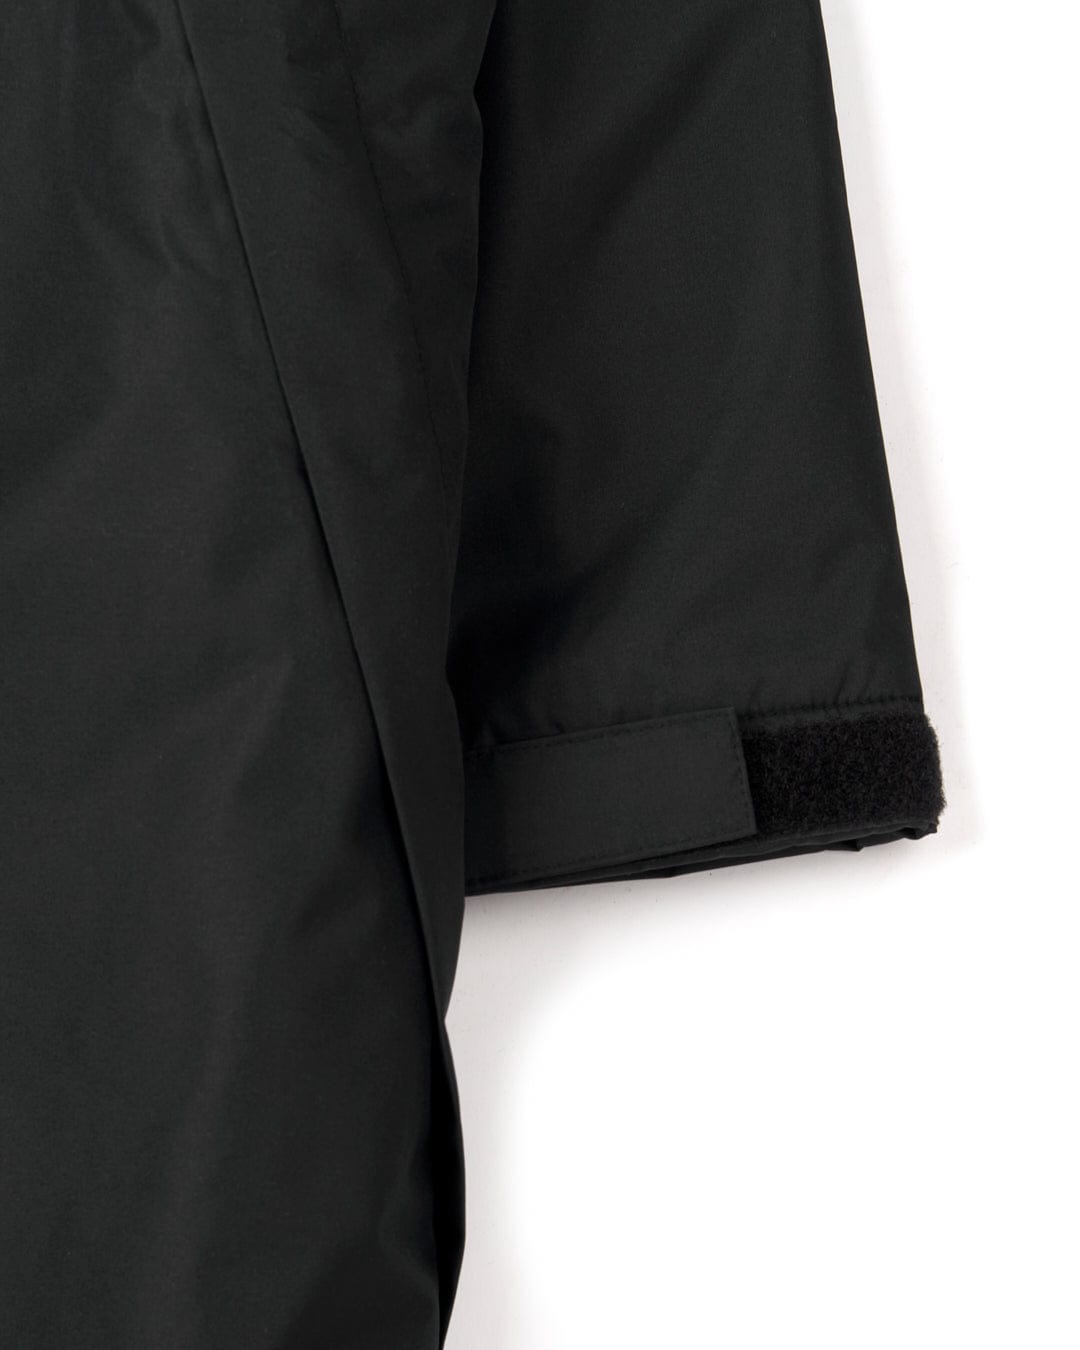 Close-up of Saltrock black trousers made from 3K waterproof riproof material, with a visible velcro strap on the cuff, against a white background.